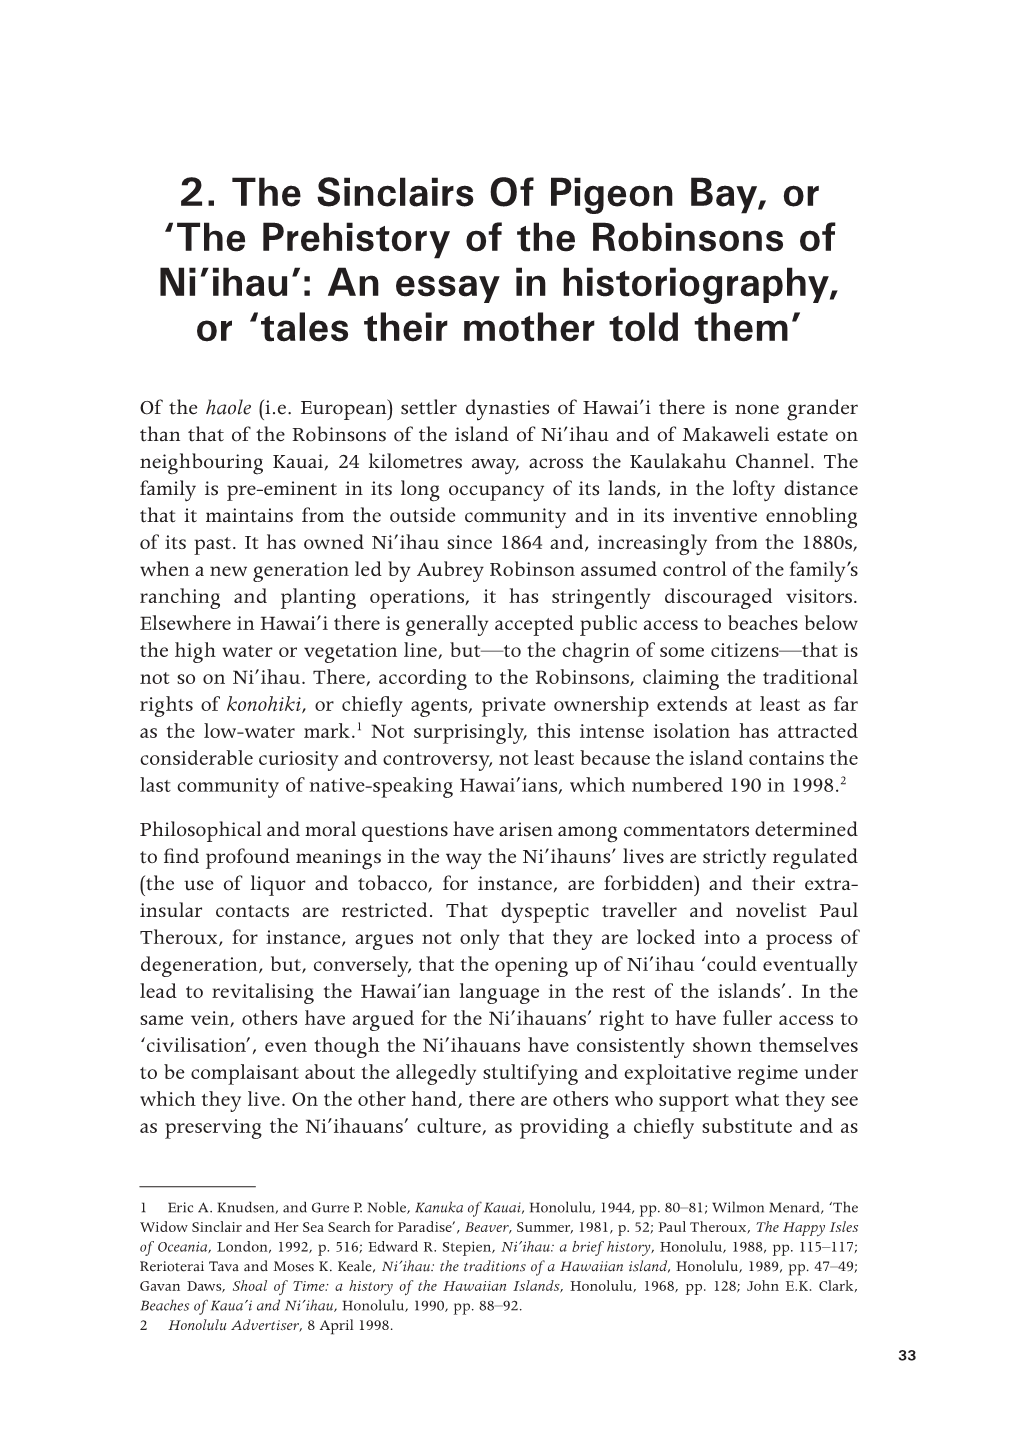 2. the Sinclairs of Pigeon Bay, Or ‘The Prehistory of the Robinsons of Ni’Ihau’: an Essay in Historiography, Or ‘Tales Their Mother Told Them’